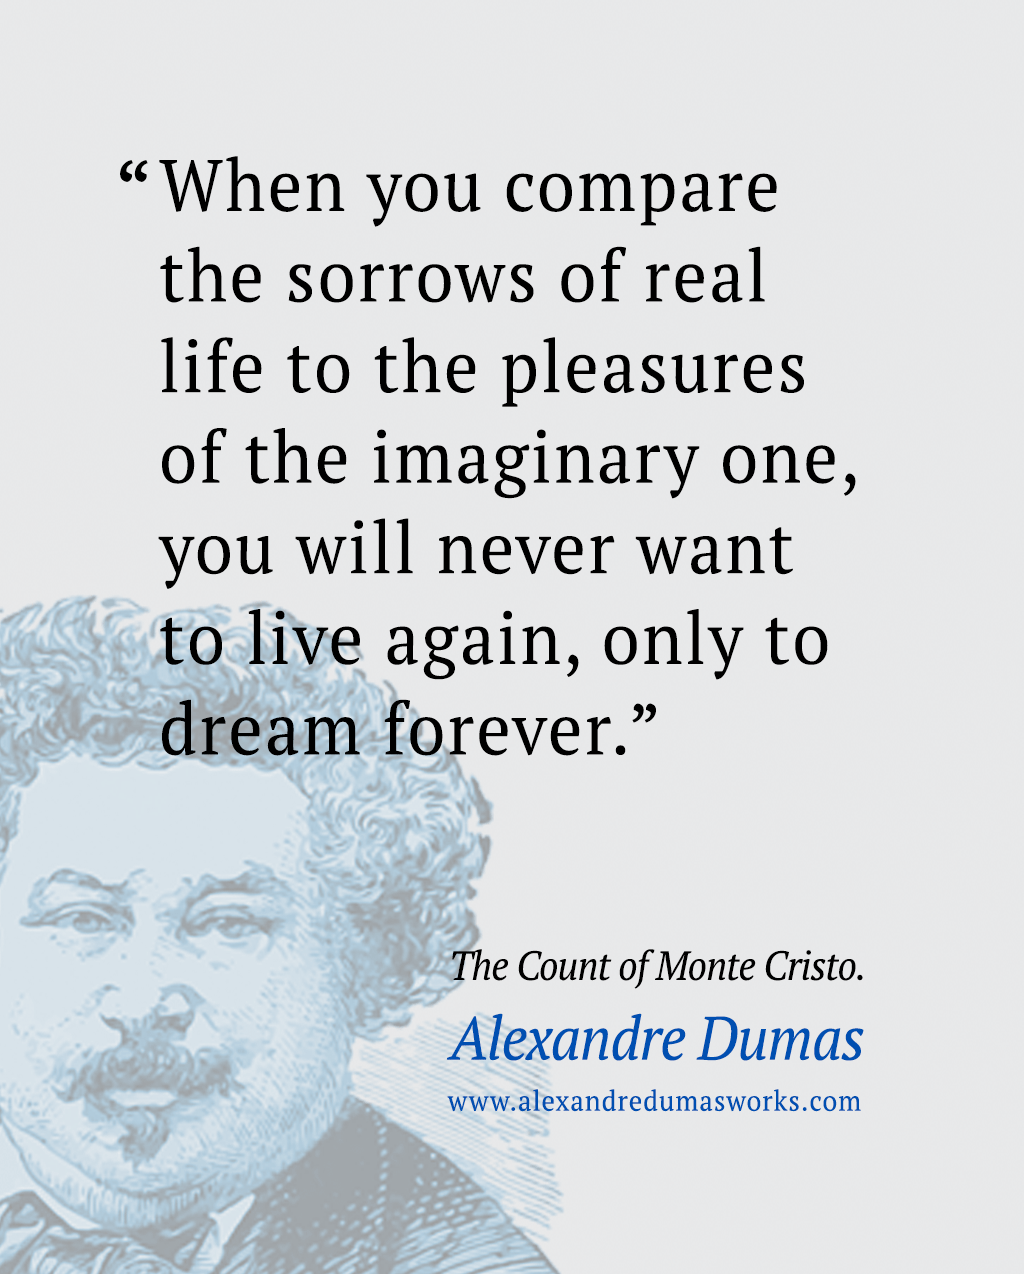 “When you compare the sorrows of real life to the pleasures of the imaginary one, you will never want to live again, only to dream forever.” ― Alexandre Dumas, The Count of Monte Cristo